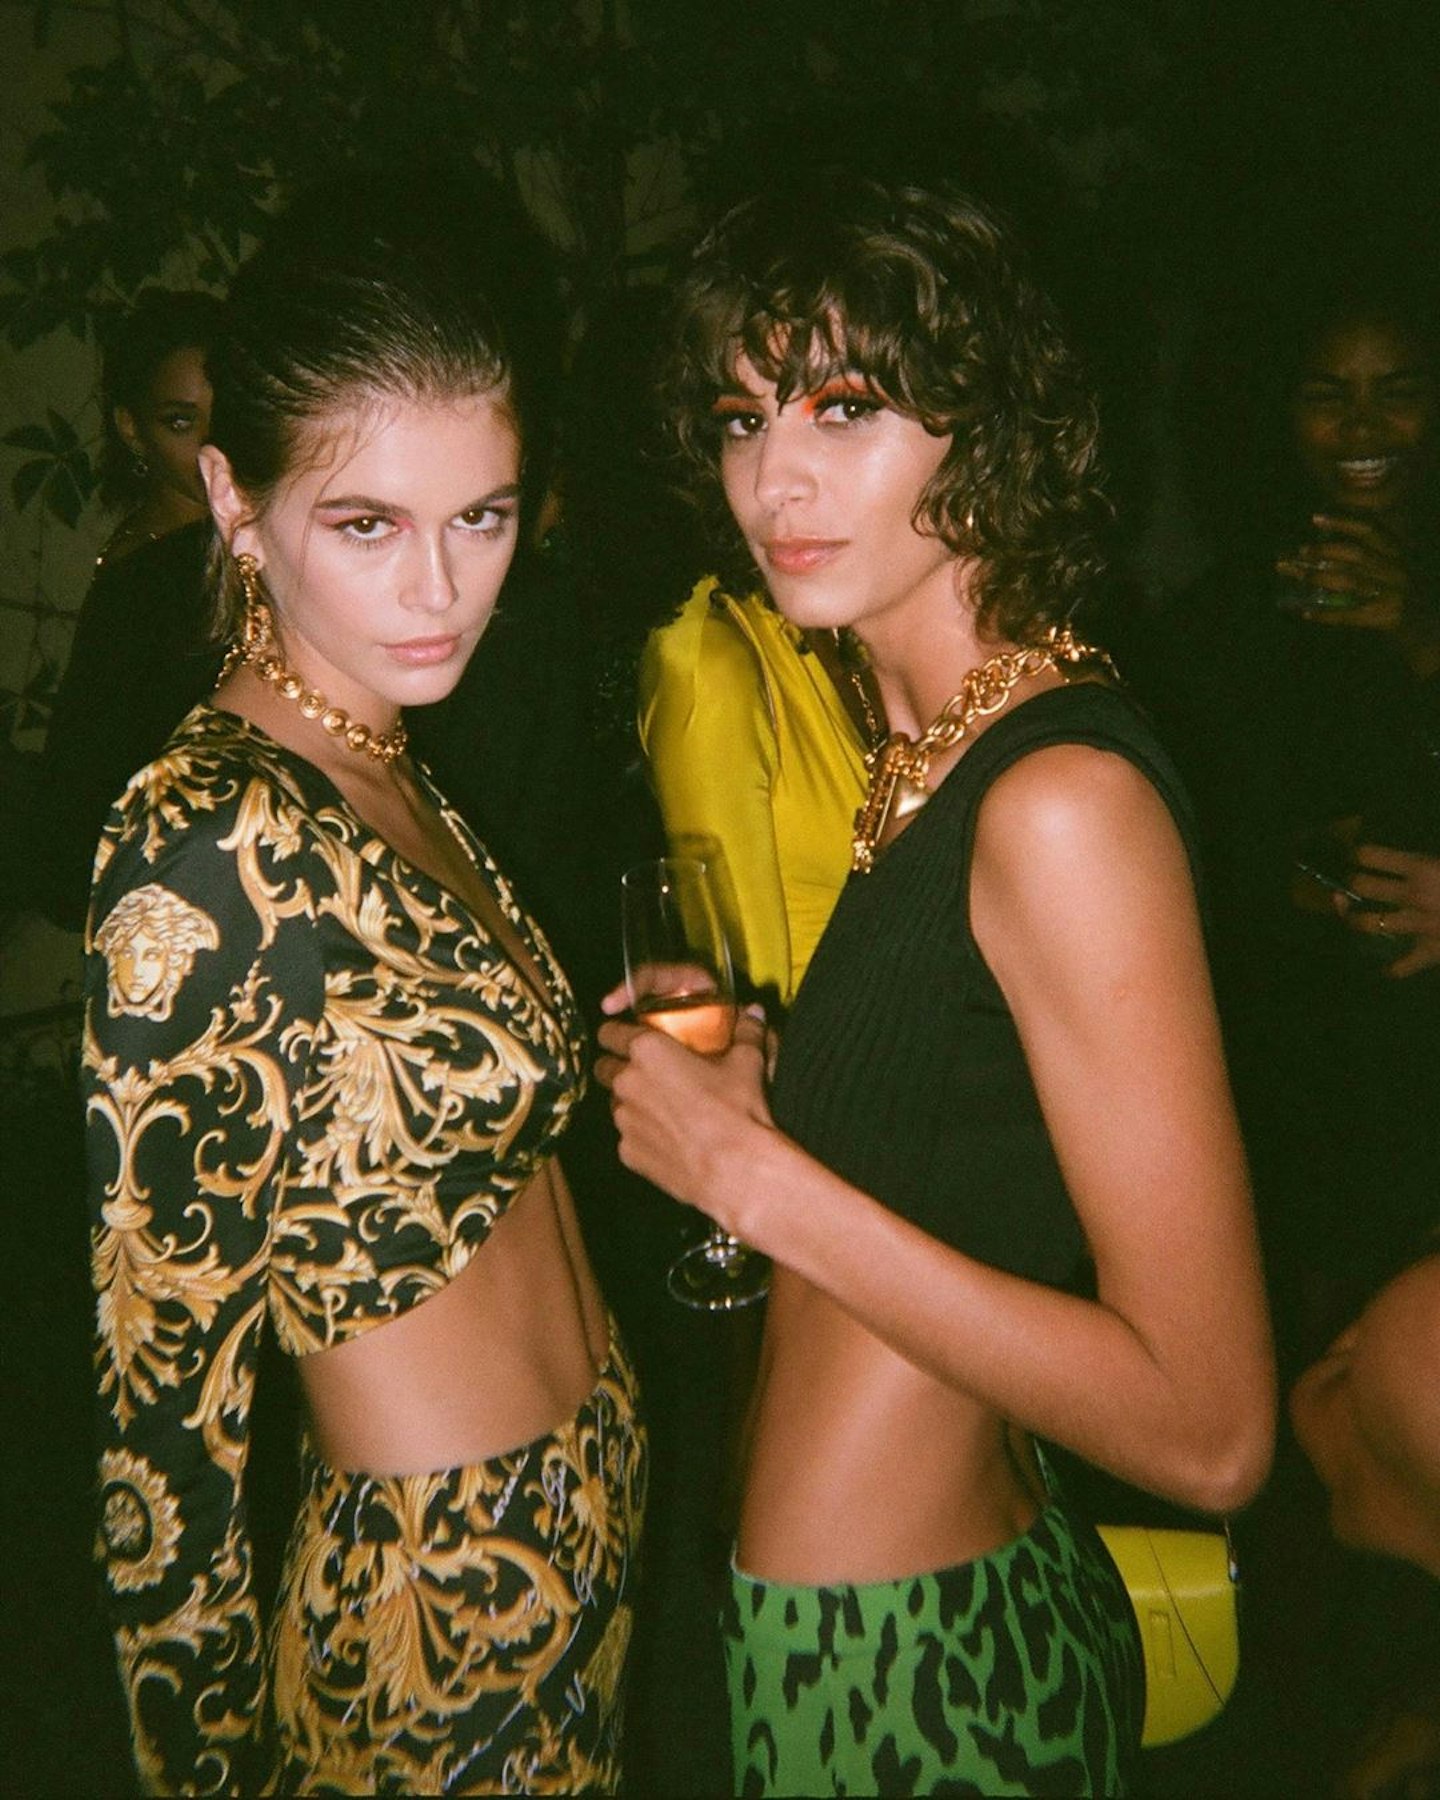 Donatellau2019s after party  MFW September 2019